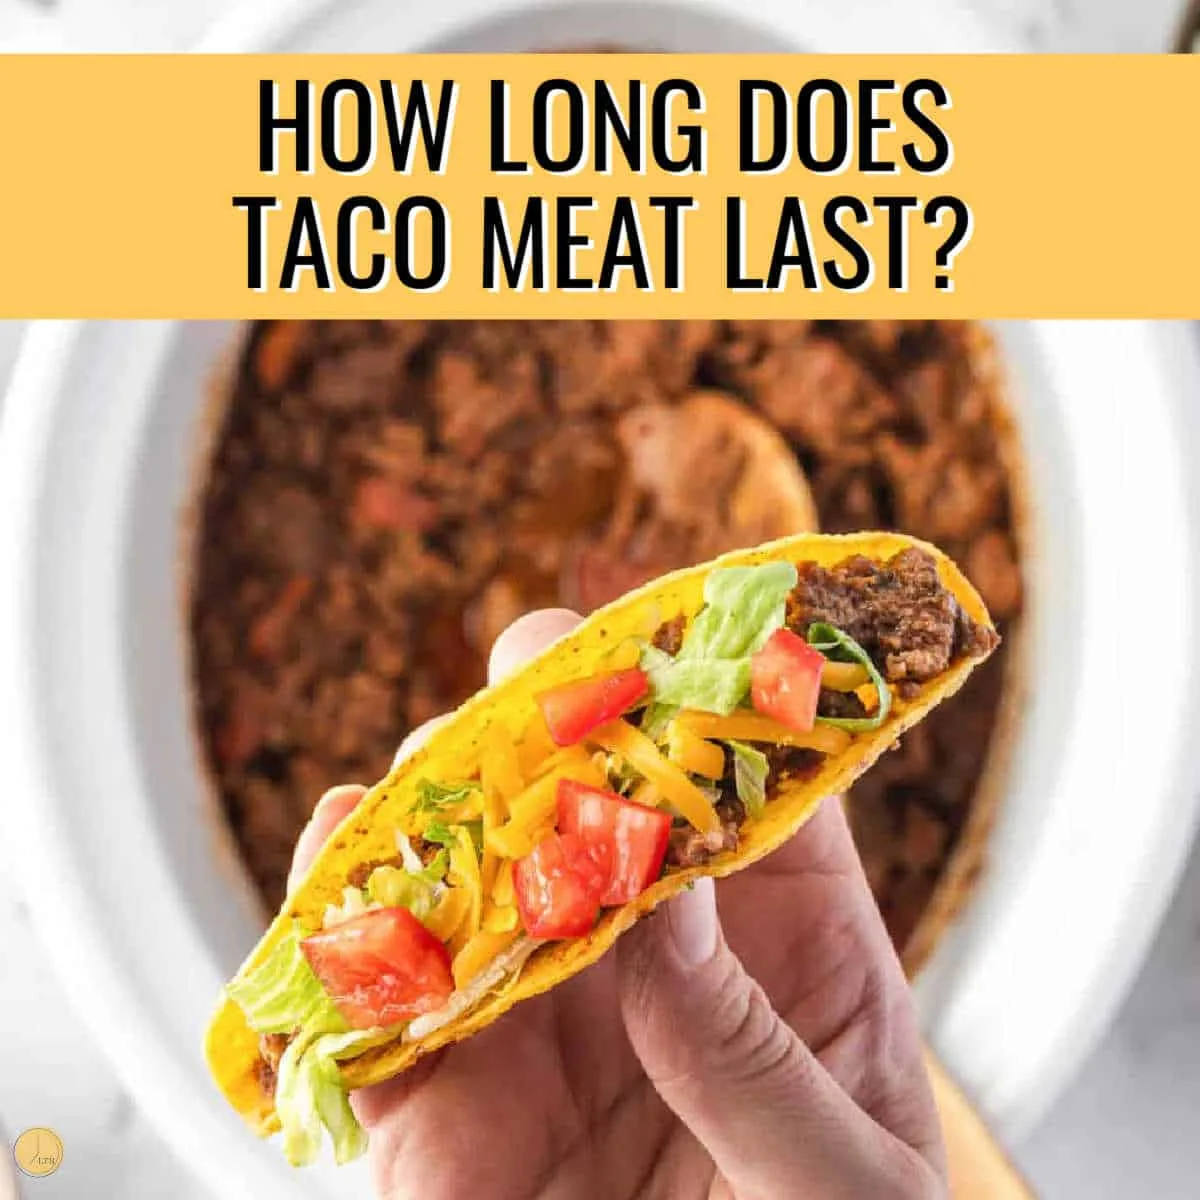 How Long Does Taco Meat Last?